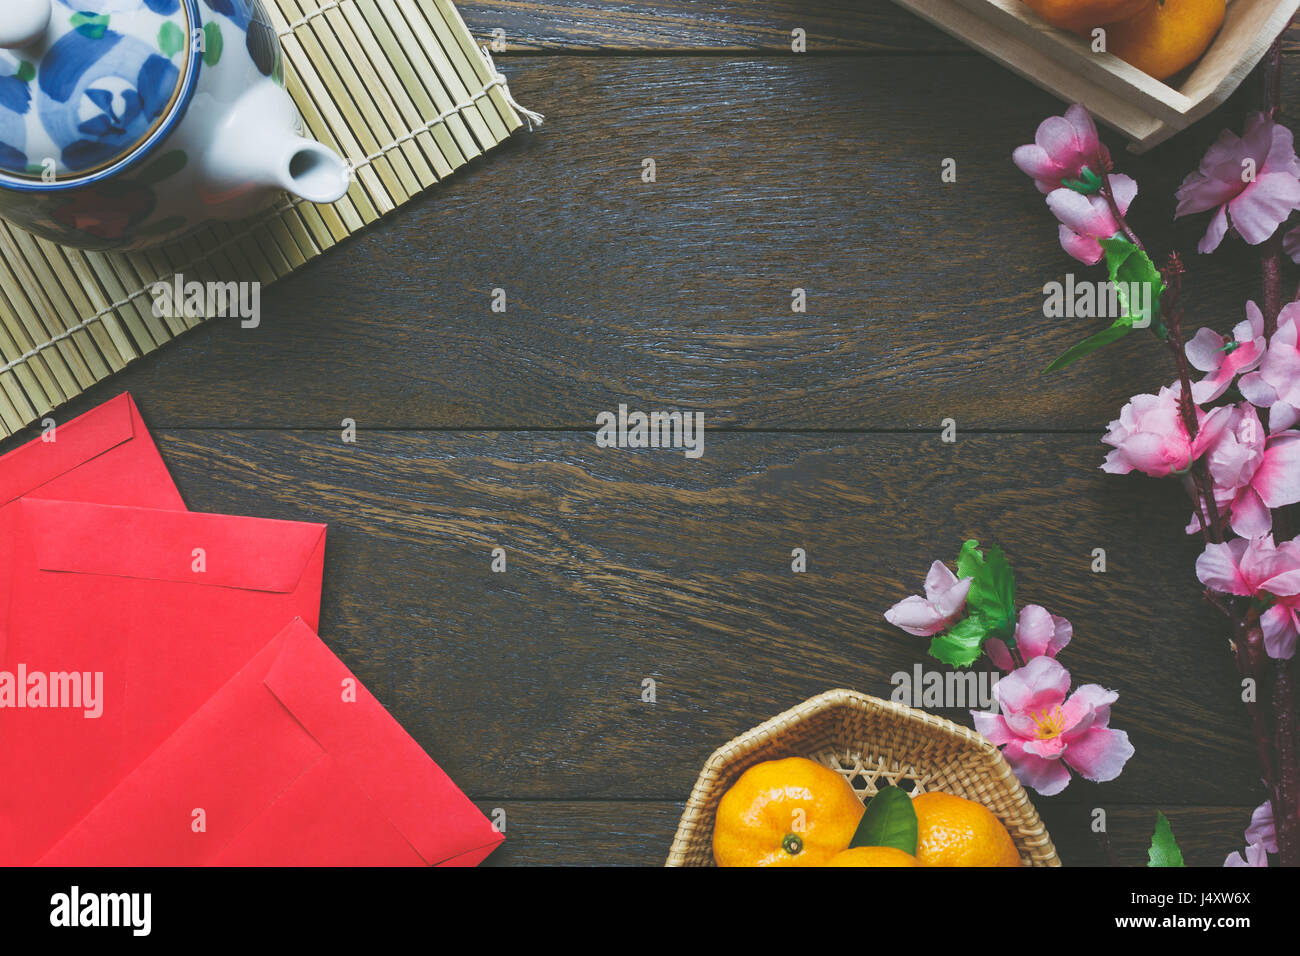 Top view accessories Chinese new year festival decorations.orange,leaf,wood basket,red packet,plum blossom,teapot on wooden table background. Stock Photo